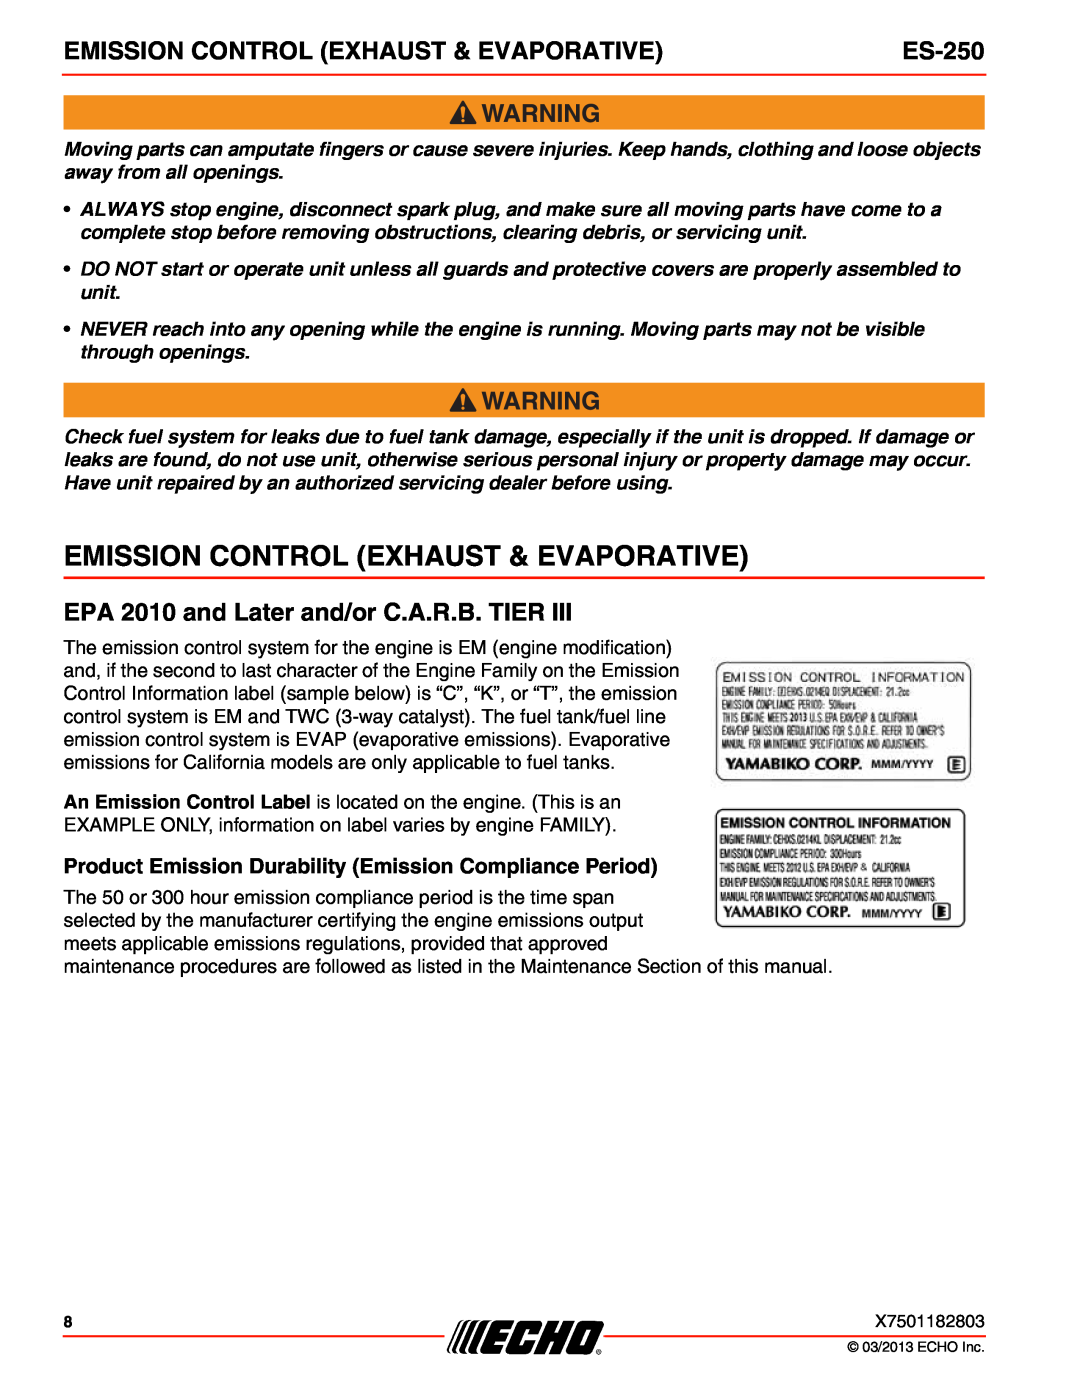 Echo ES-250 specifications Emission Control Exhaust & Evaporative, EPA 2010 and Later and/or C.A.R.B. TIER 